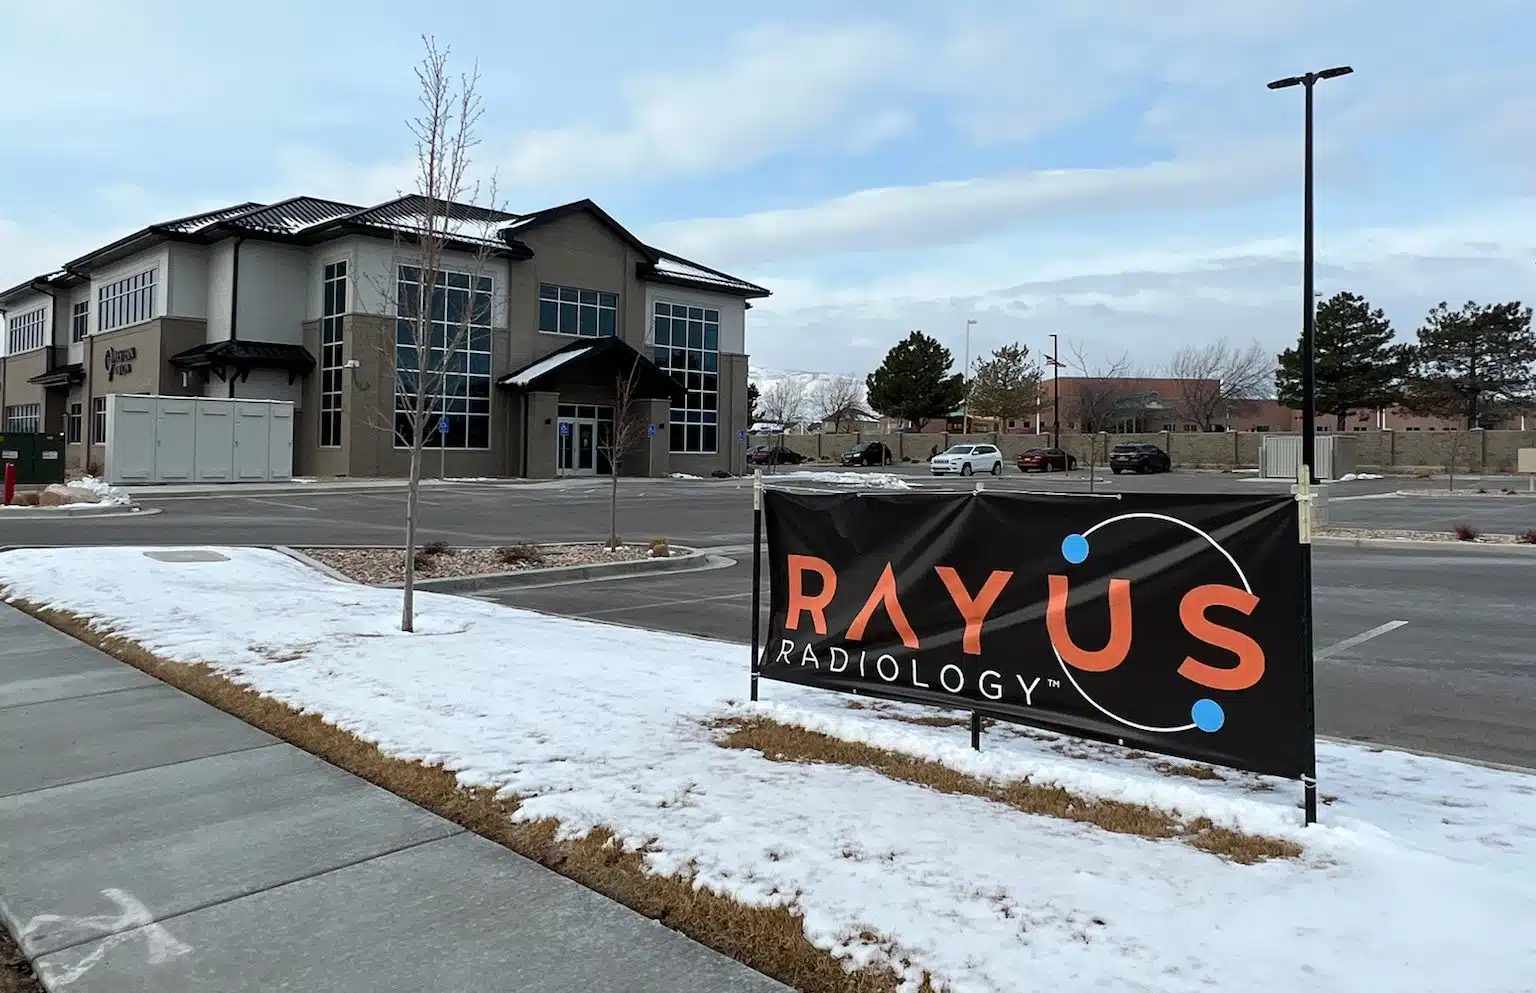 RAYUS Radiology diagnostic imaging center in 12842 South 3600 W., Riverton, UT 84065